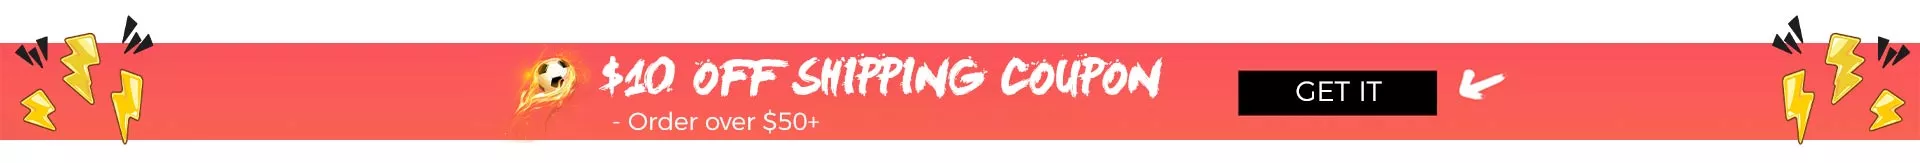 FREE SHIPPING COUPON - bestsoccerstore